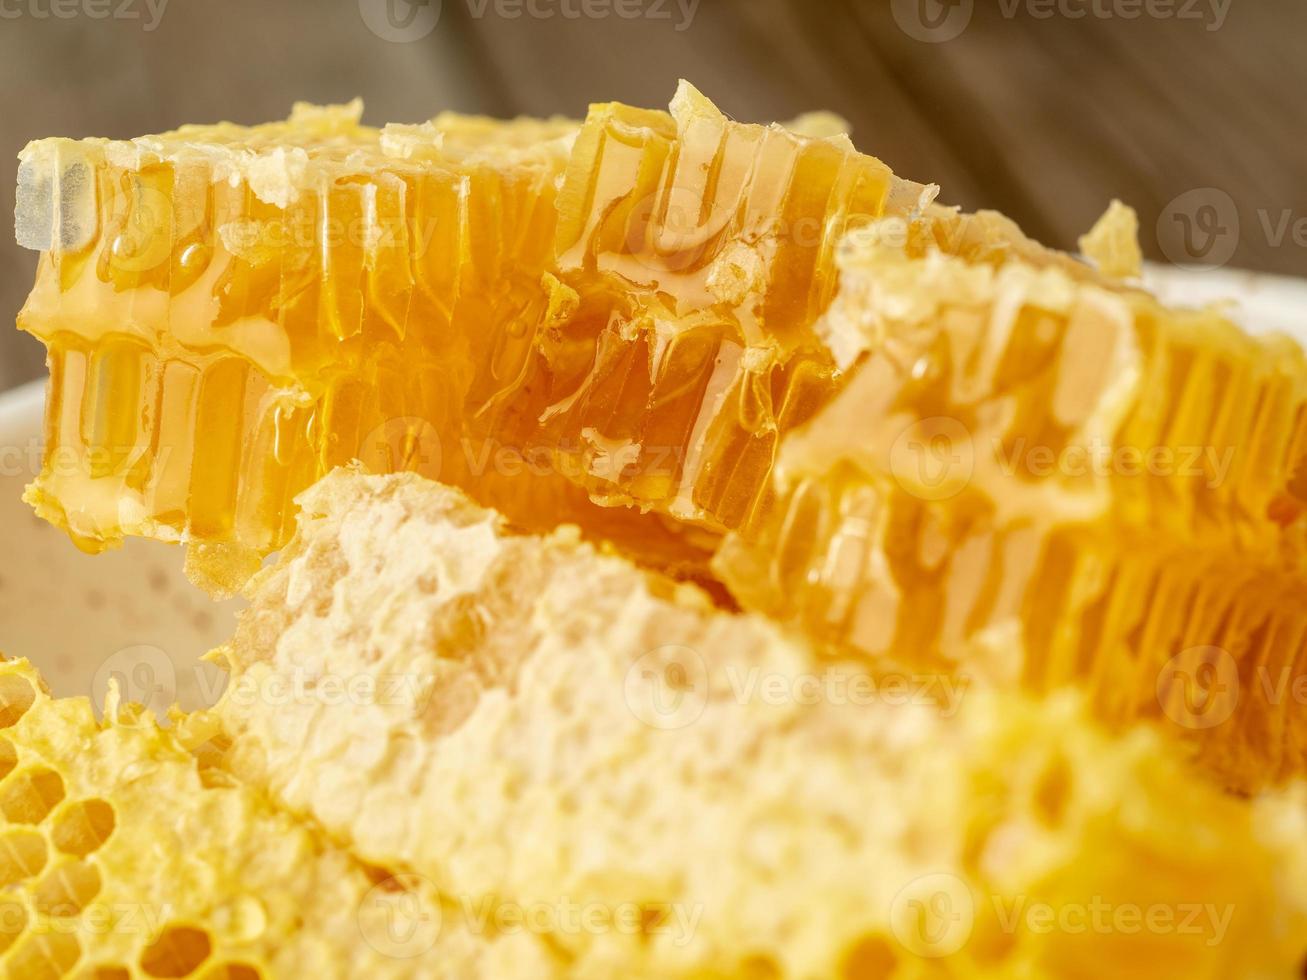 honey in honeycomb, close-up, on white ceramic plate, on wooden rustic table, photo